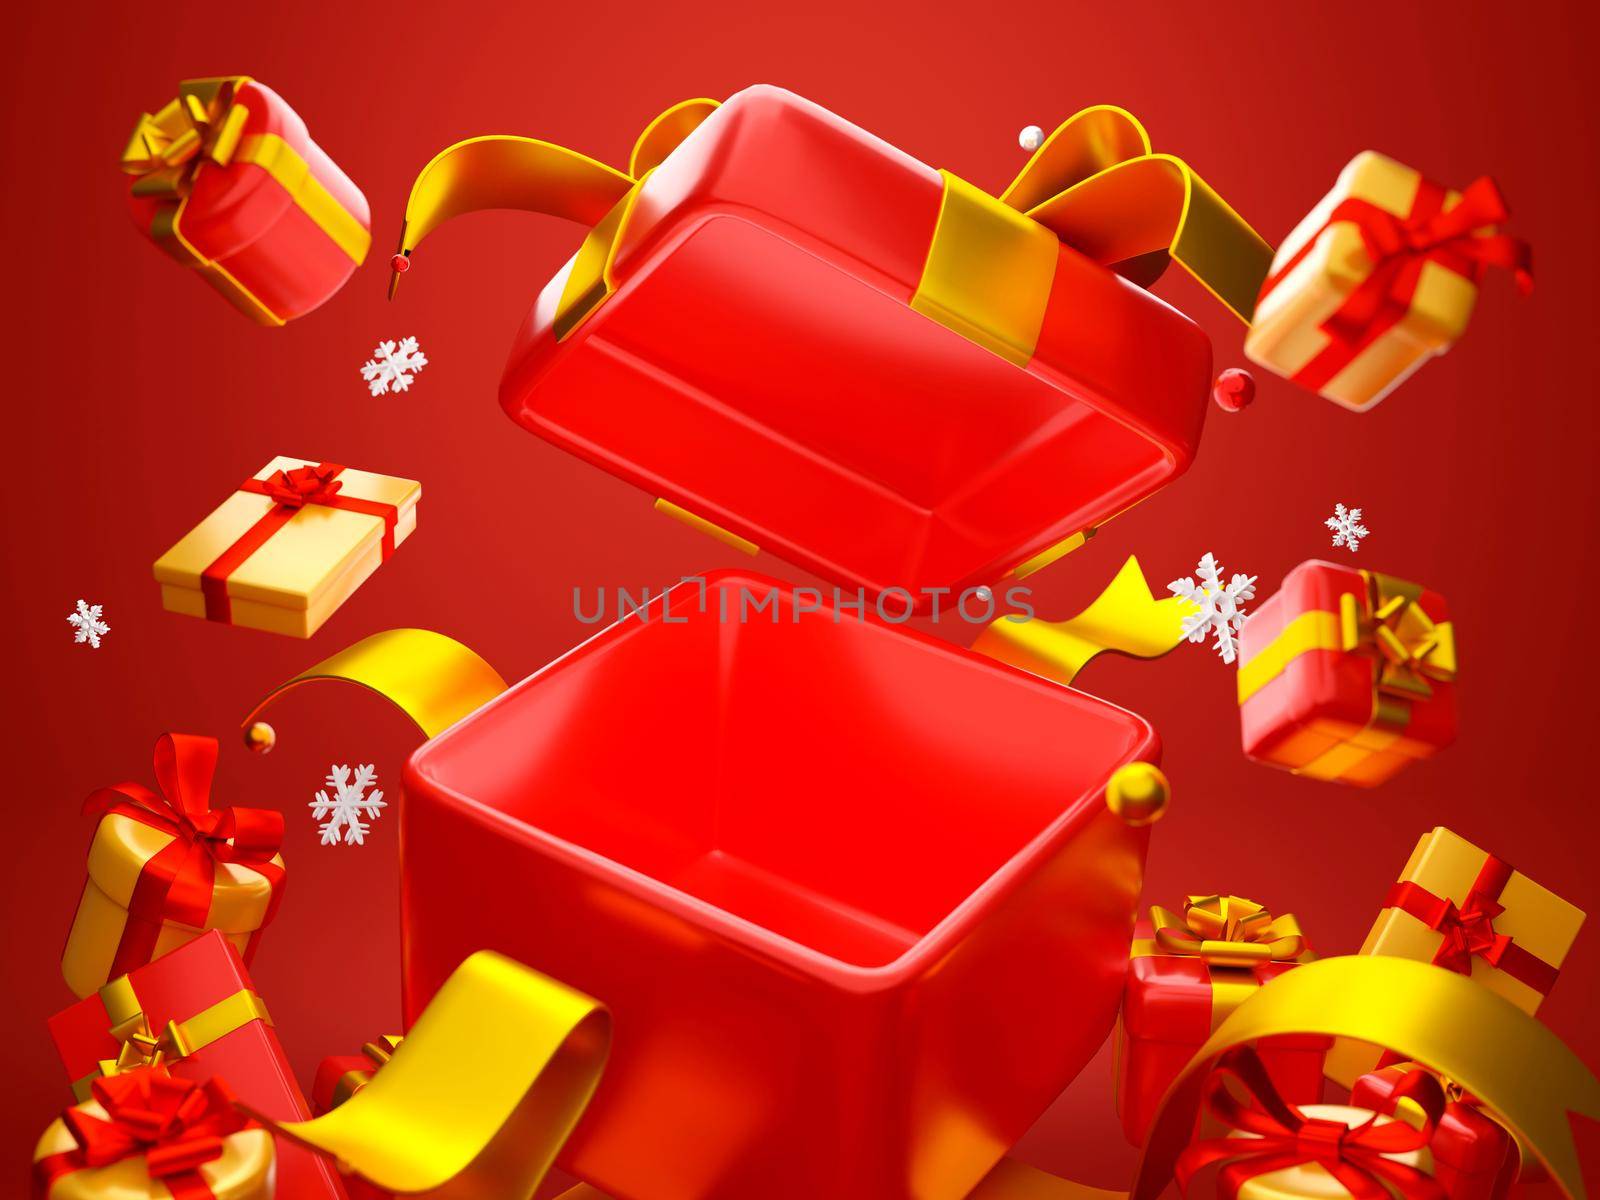 Christmas theme opened gift box for product advertisement, 3d illustration